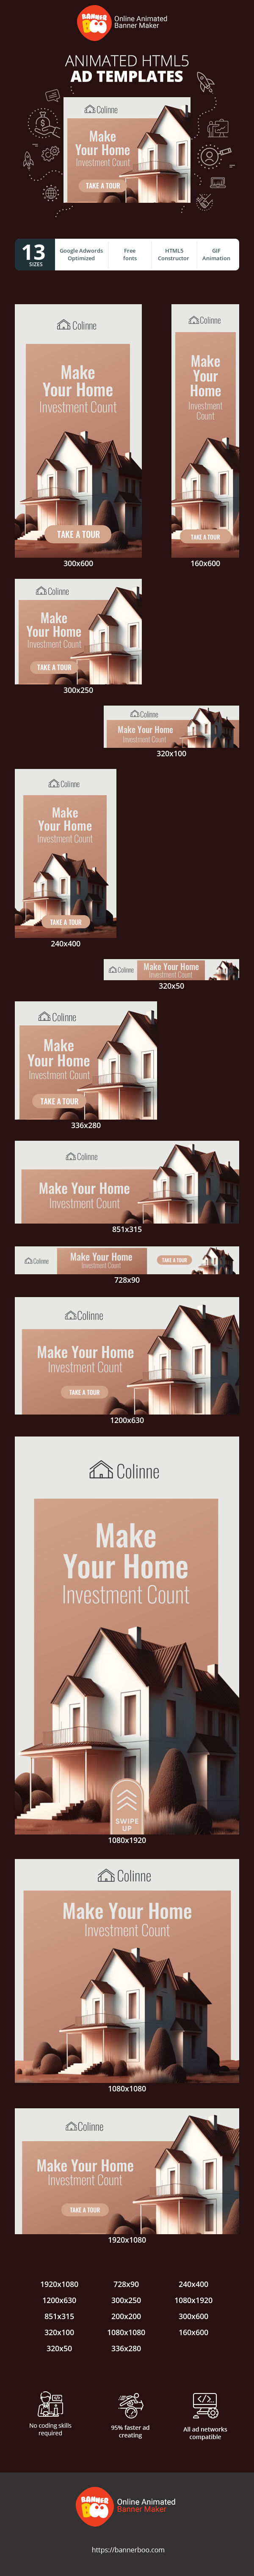 Banner ad template — Make Your Home Investment Count — Real Estate